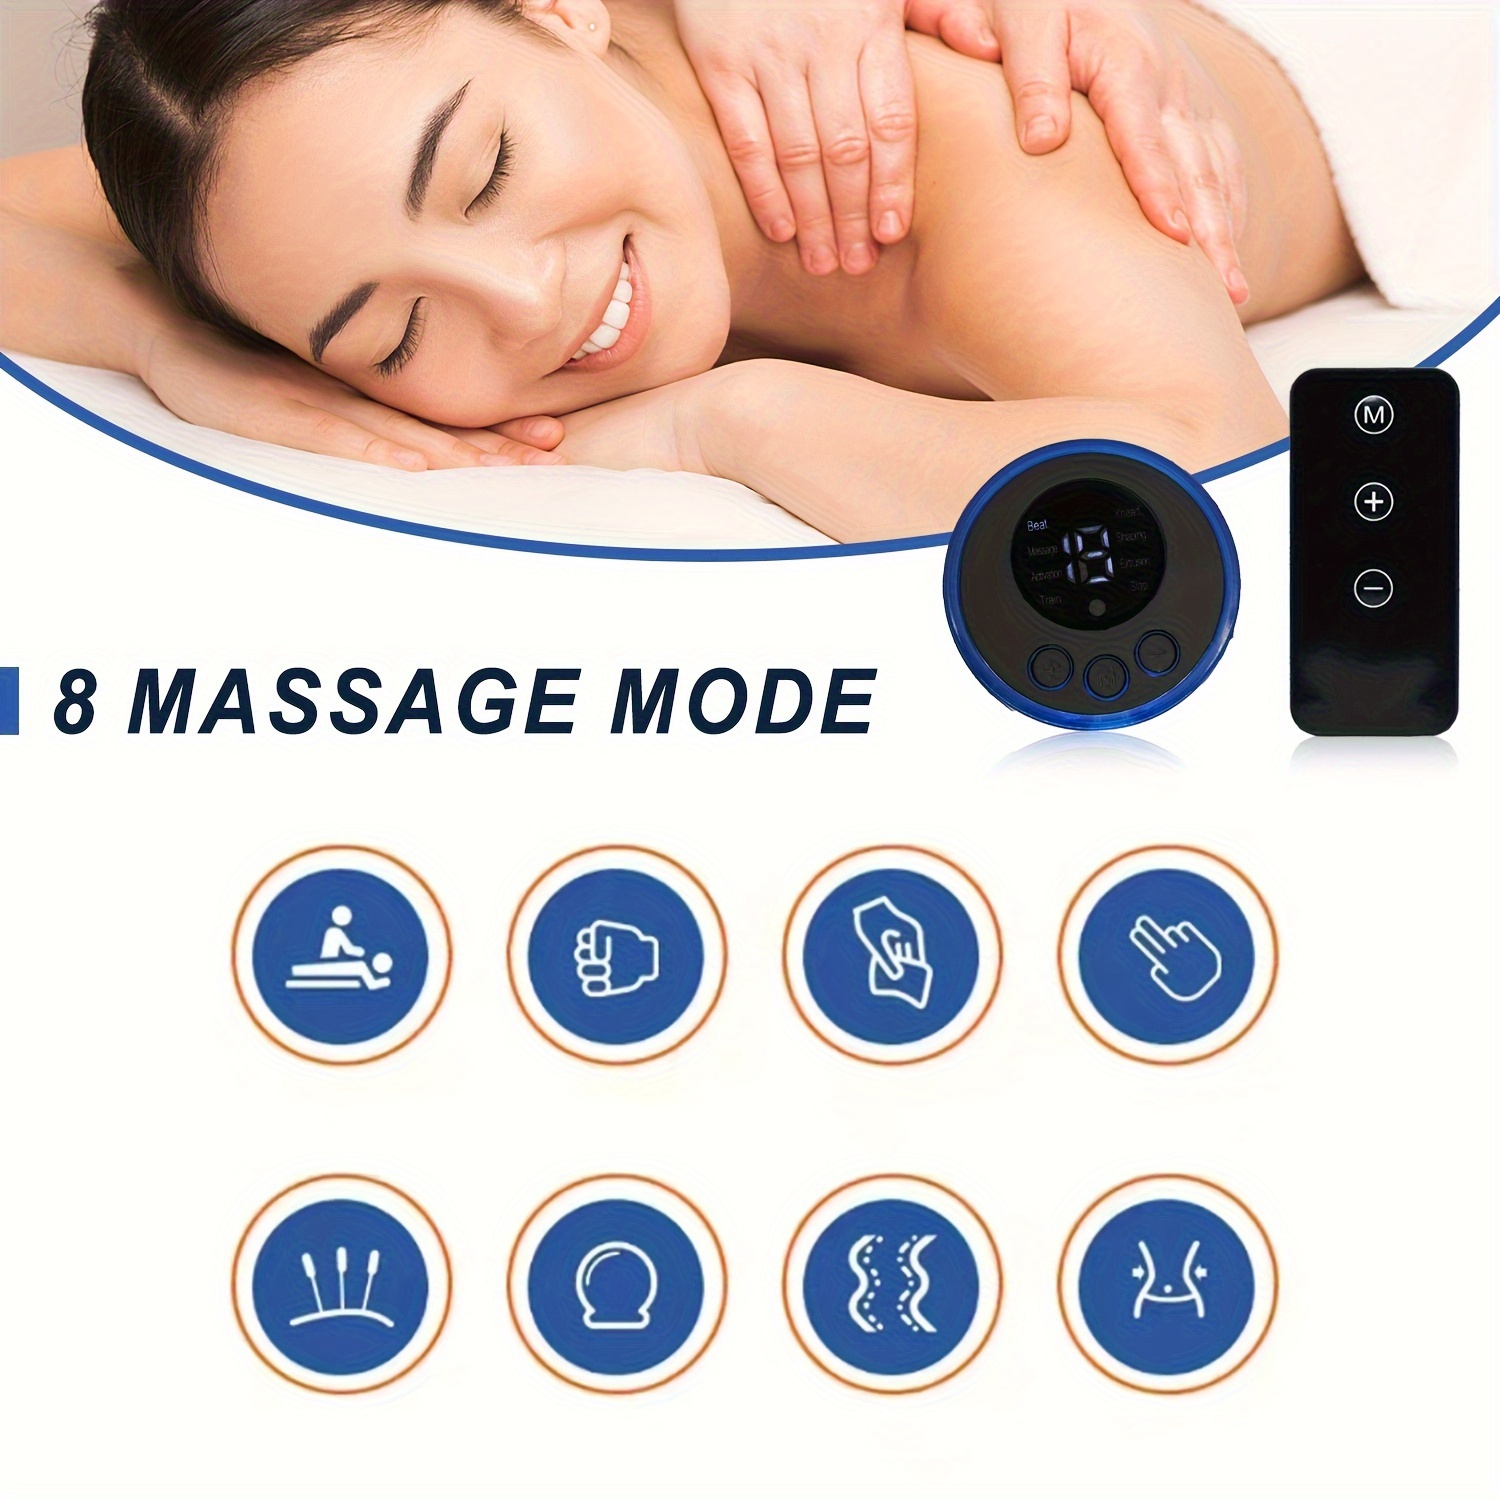 

Portable Mini Massager, 5 Patches Suit, With Replacable Patches For Thighs, Back, Arms, Body Relax, Suit Work Home Travel, 8 Modes 19 Gear Forces